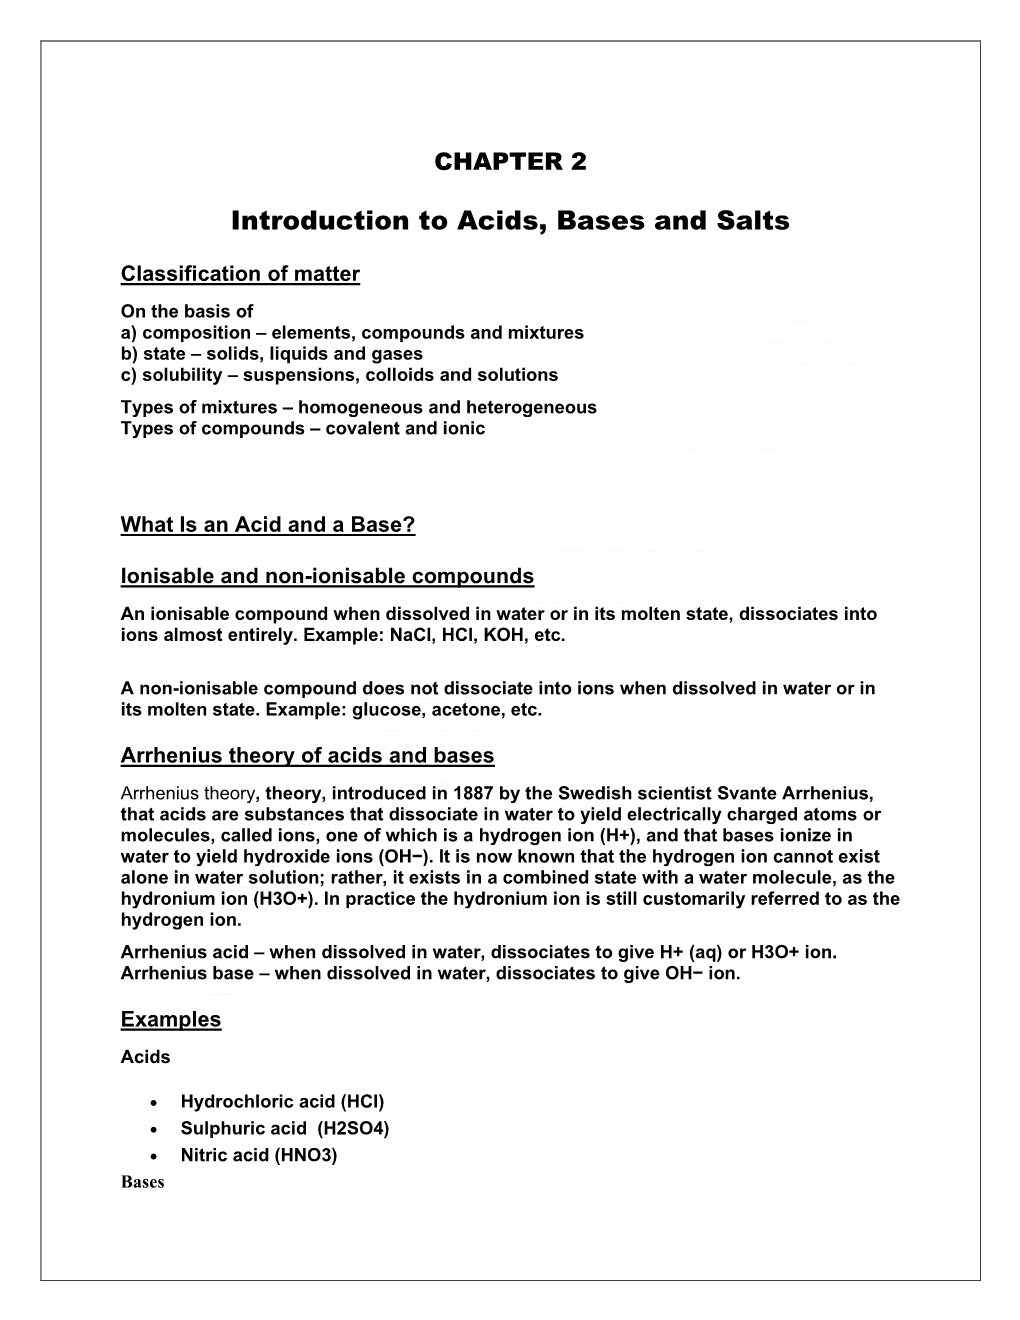 Introduction to Acids, Bases and Salts